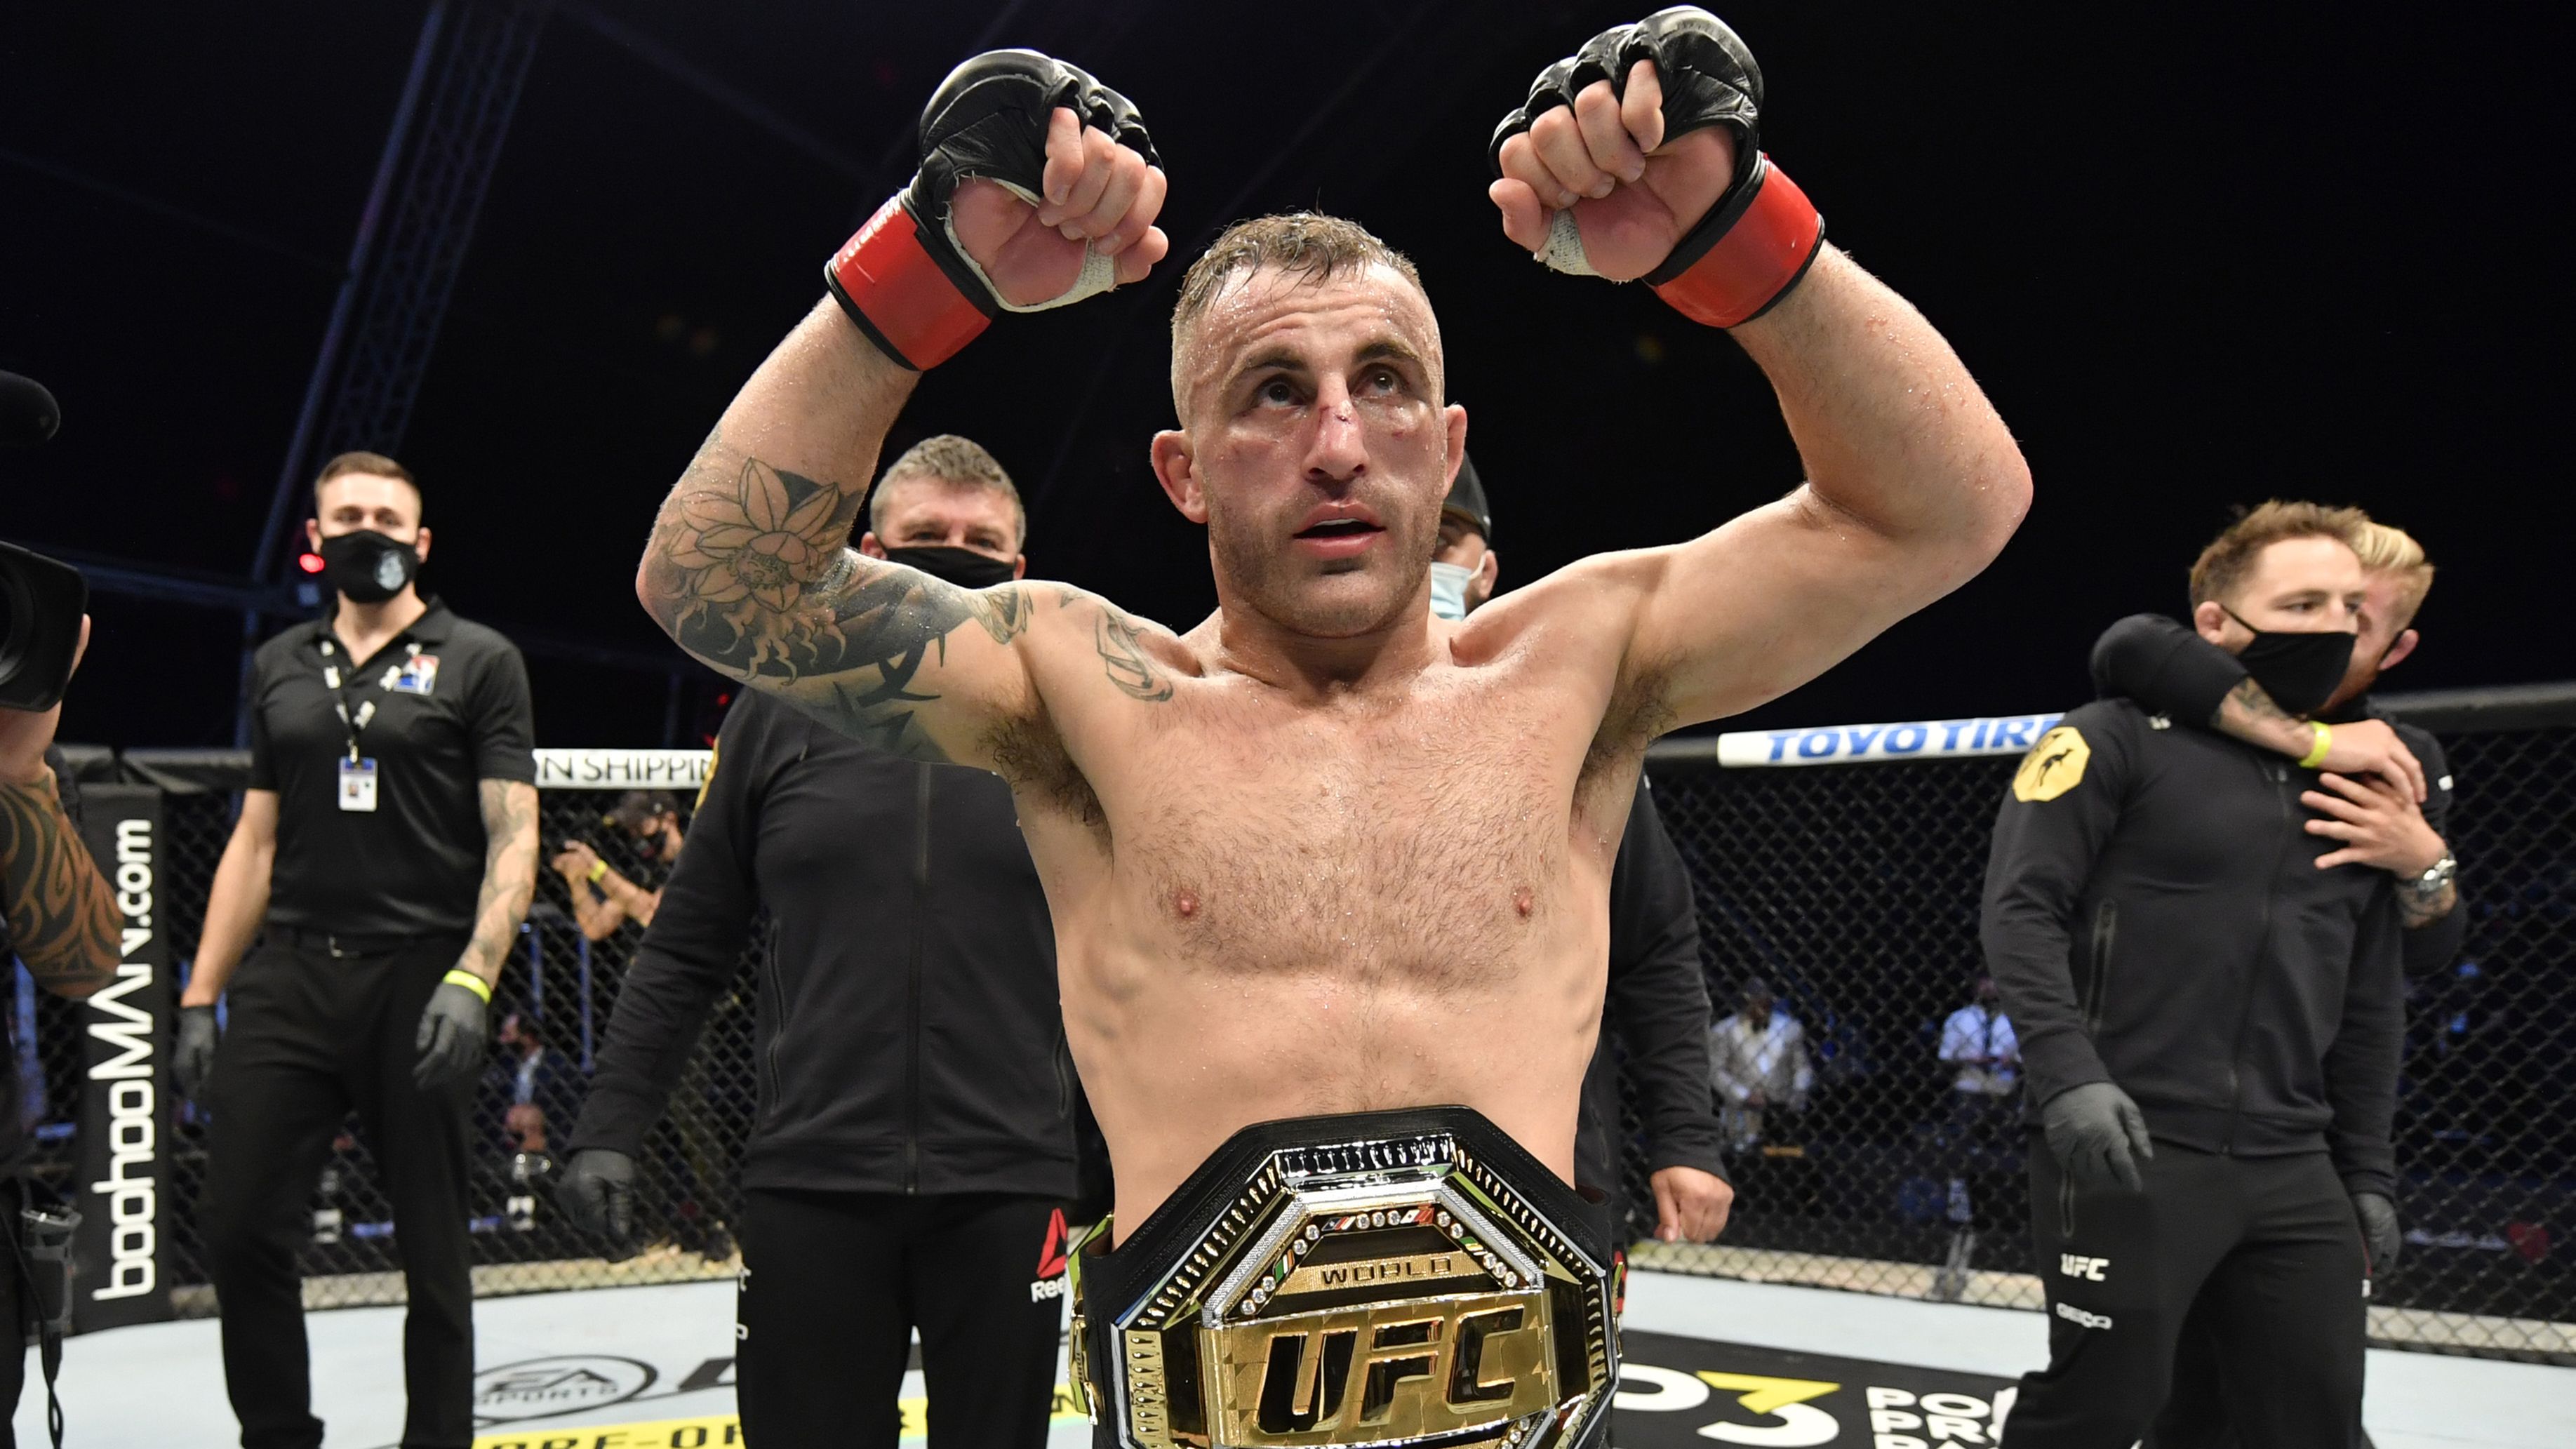 UFC title fight between Alexander Volkanovski and Brian Ortega off after champ tests positive for COVID-19